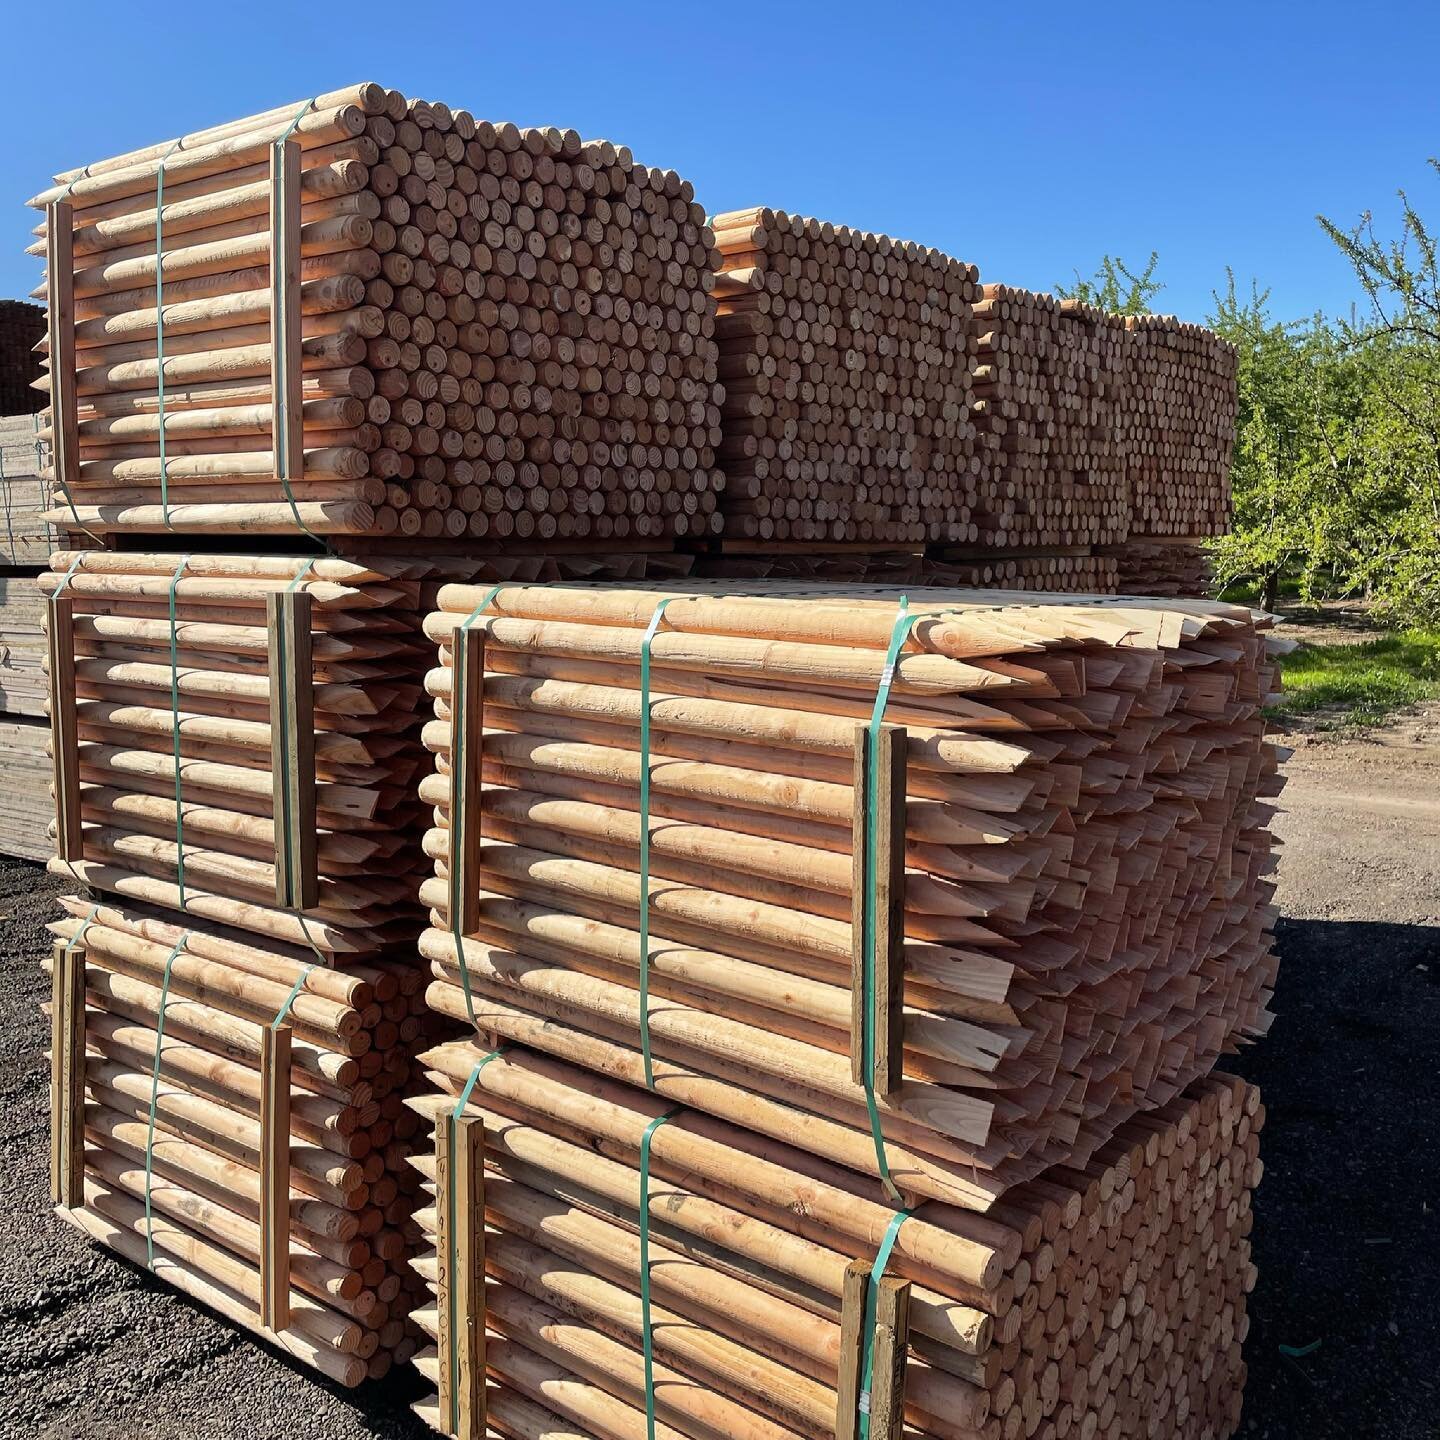 Winds are picking up again! Some of our customers use a beefy stake (2 1/4 x 4) for their almonds due to their location and how much wind they get. If you have needs we have options! #almondstakes #growers #cagrowers #caag #aandgagsupply #stakes